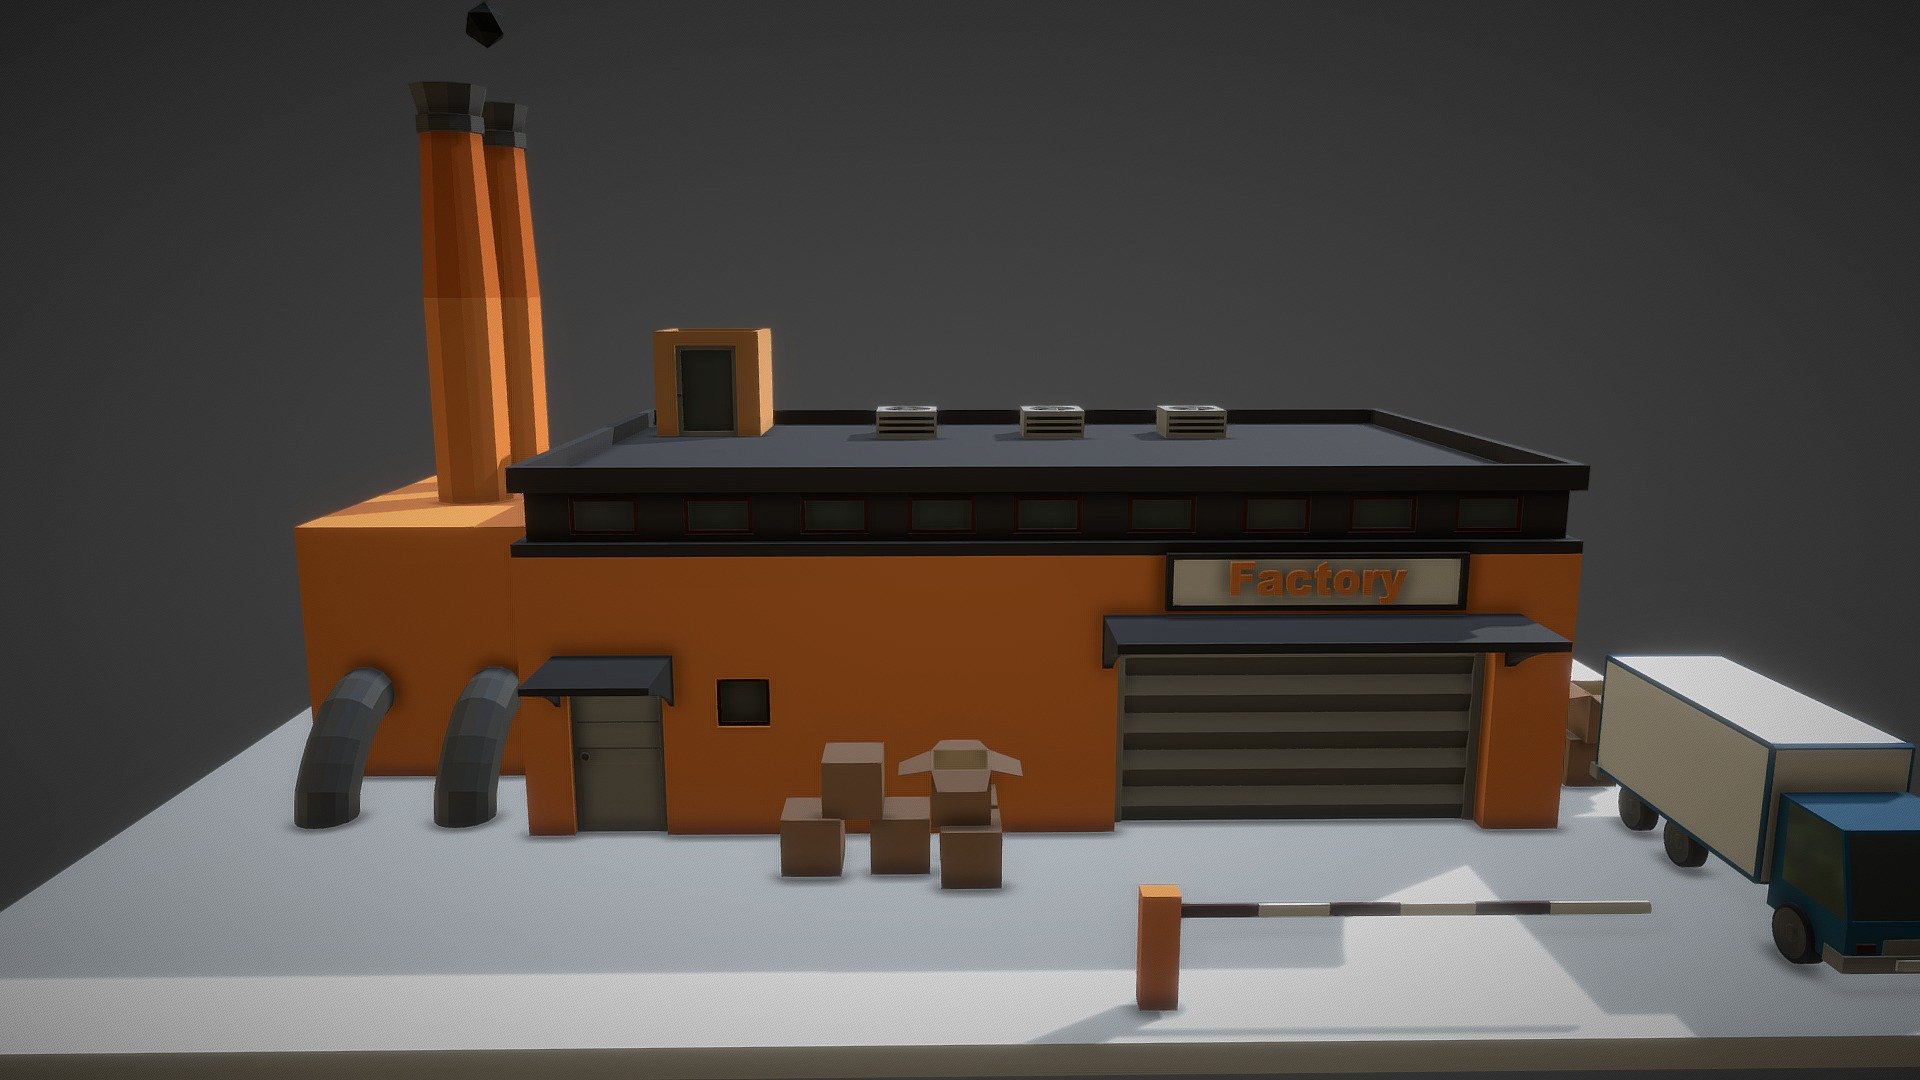 ♦ Low Poly Factory

♦  Materials and textures.

 ° All materials included.
 ° All textures included.
 - Low Poly Factory - Buy Royalty Free 3D model by Payne (@NeedLowPoly) 3d model